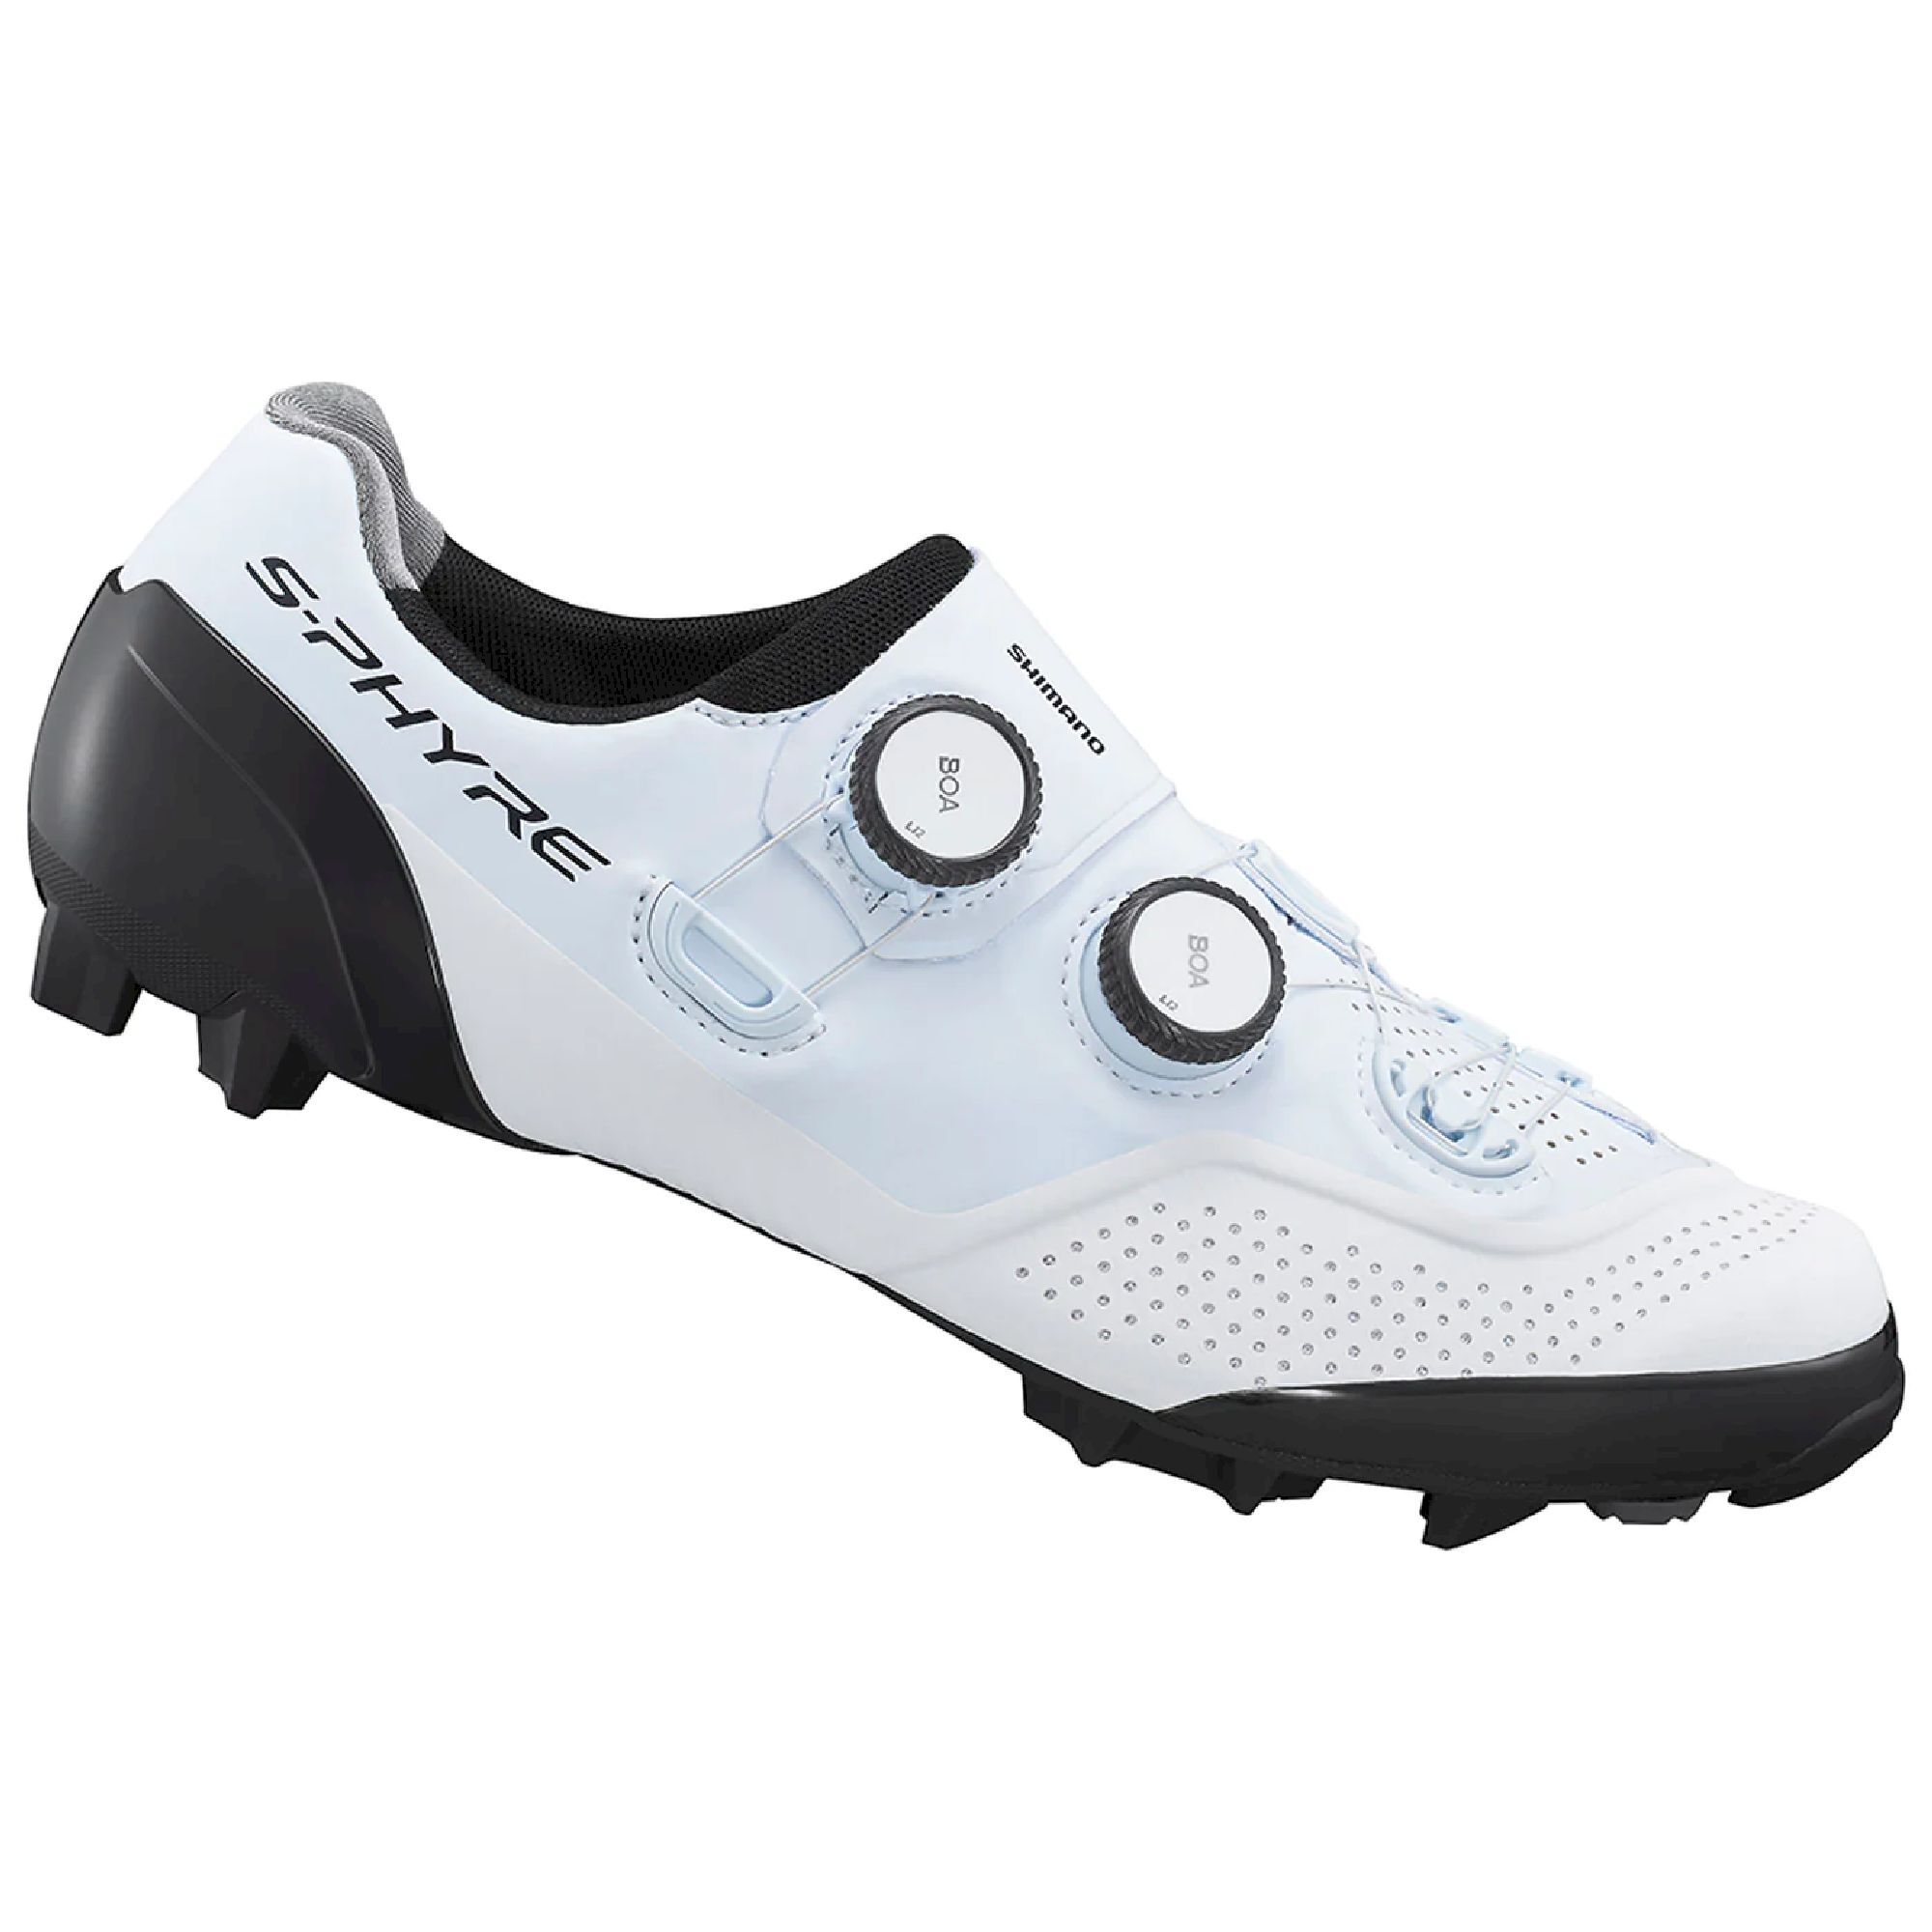 Shimano XC902 - Chaussures VTT homme